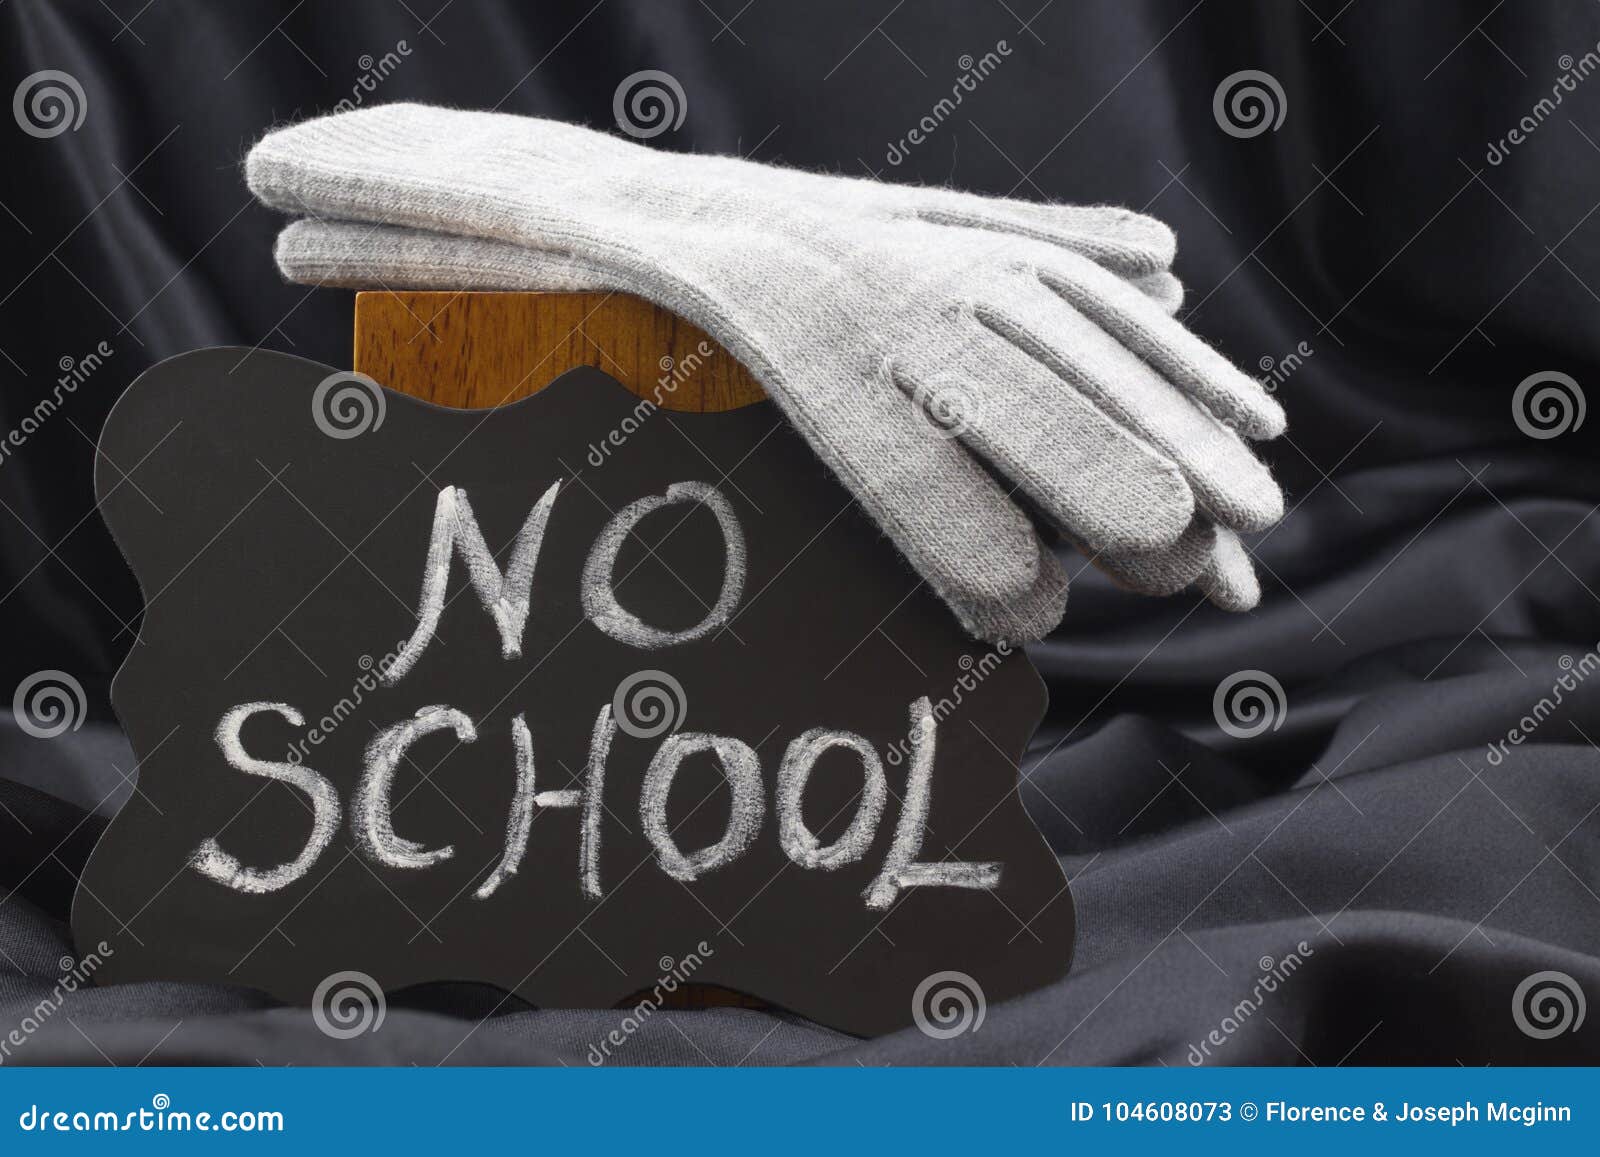 no school sign on chalkboard against black satin warns of cold w